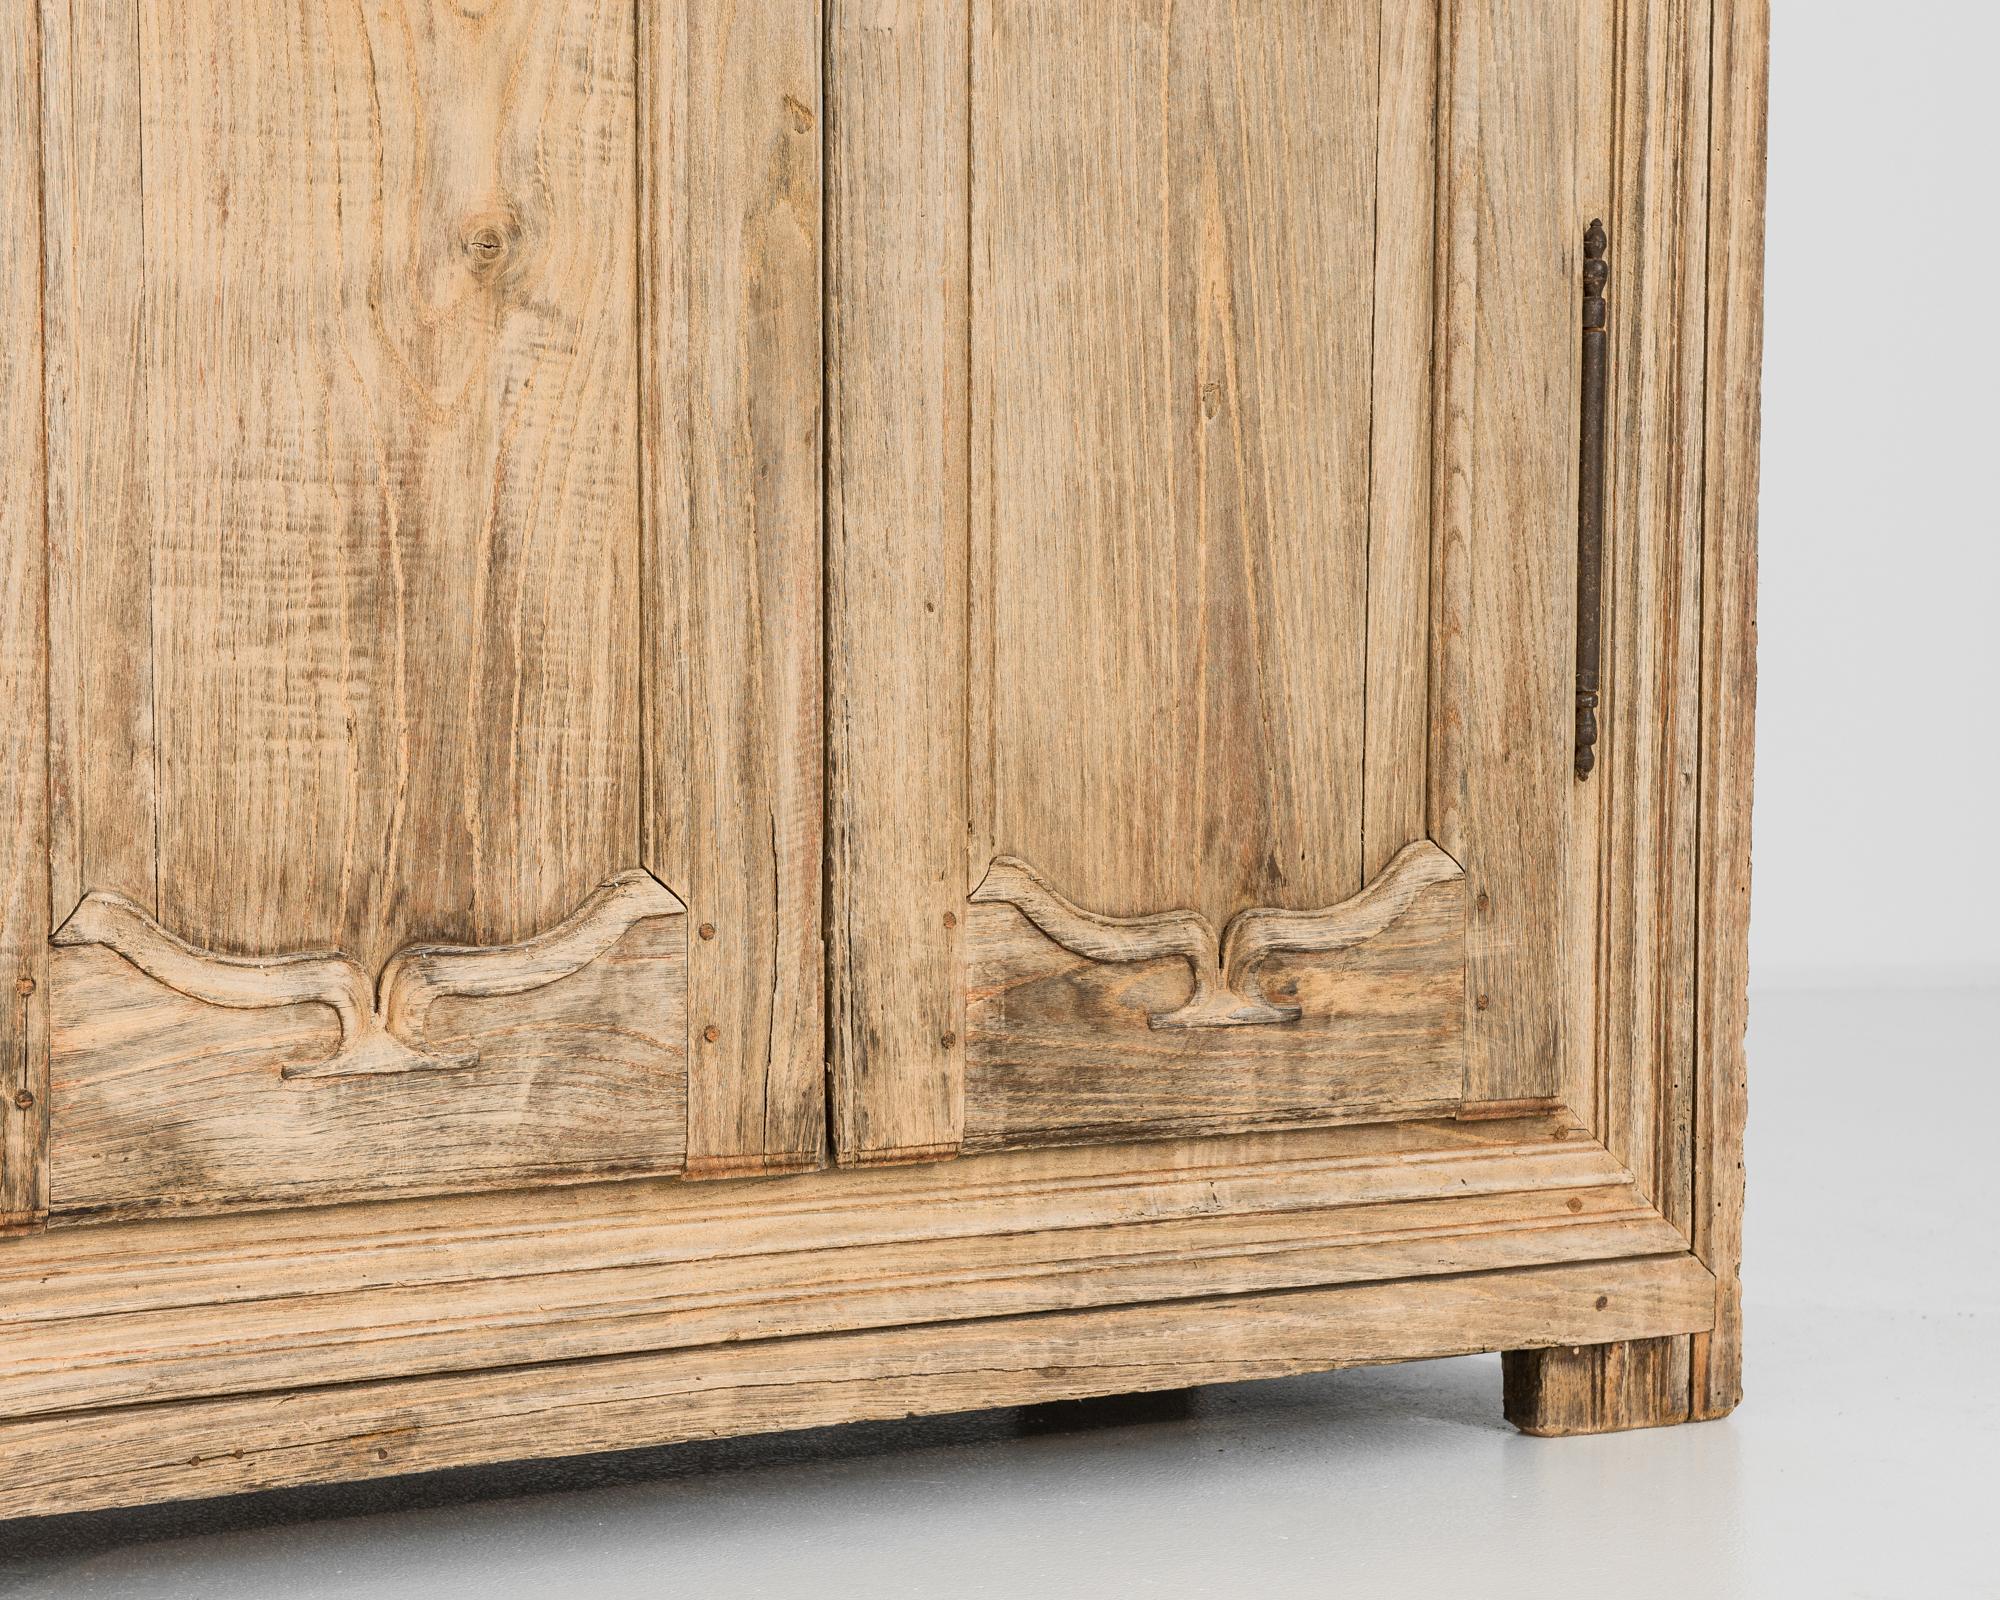 1800s French Bleached Oak Cabinet 4